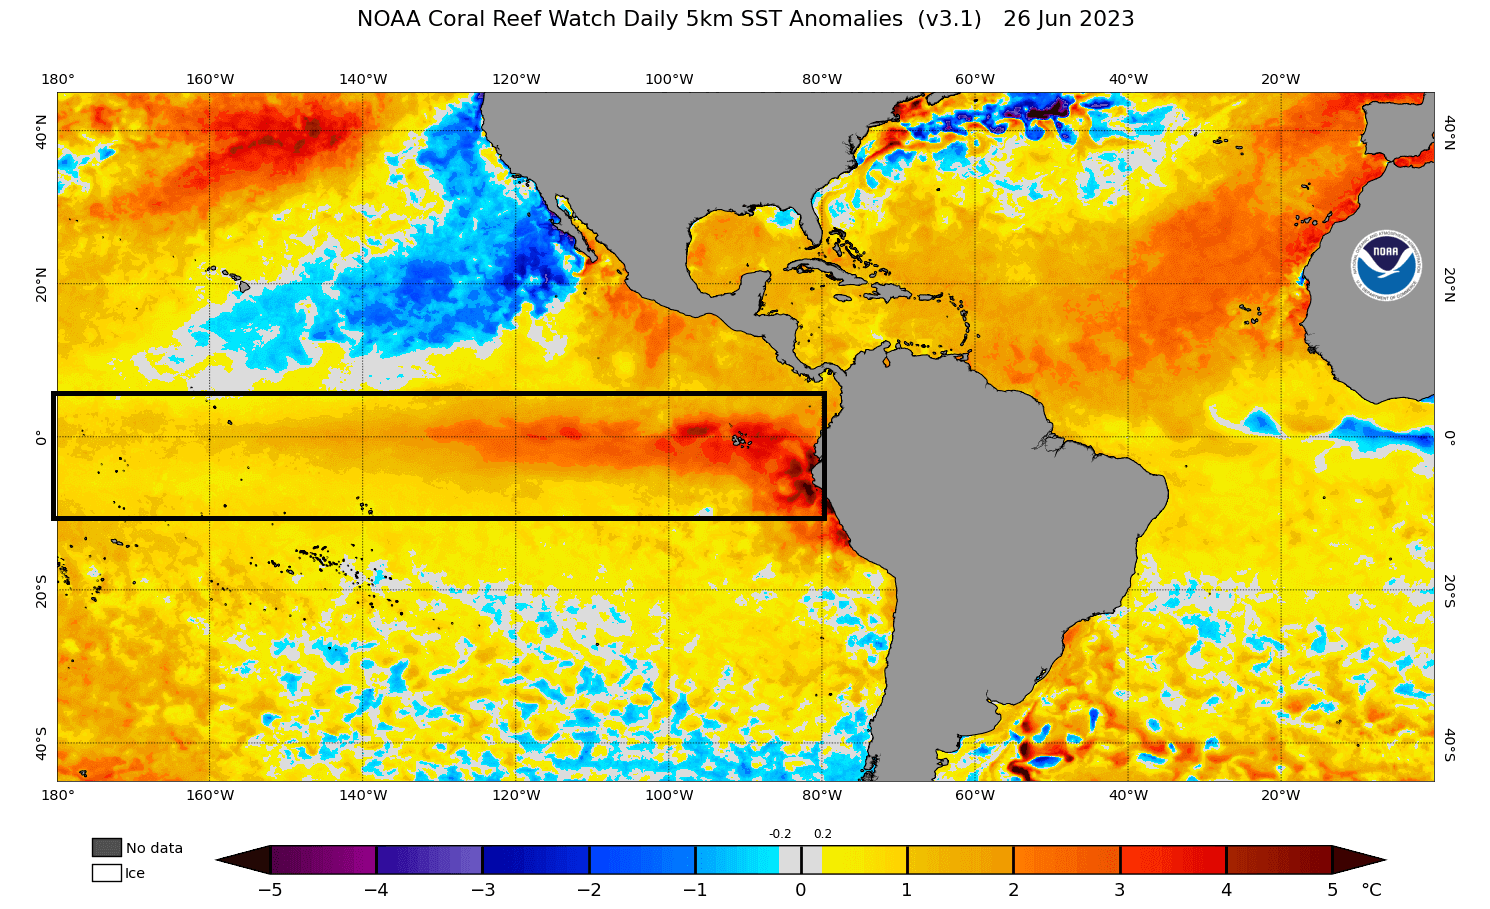 el-nino-watch-weather-forecast-sea-surface-ocean-temperature-anomaly-pacific-united-states-winter-2023-2024-impact